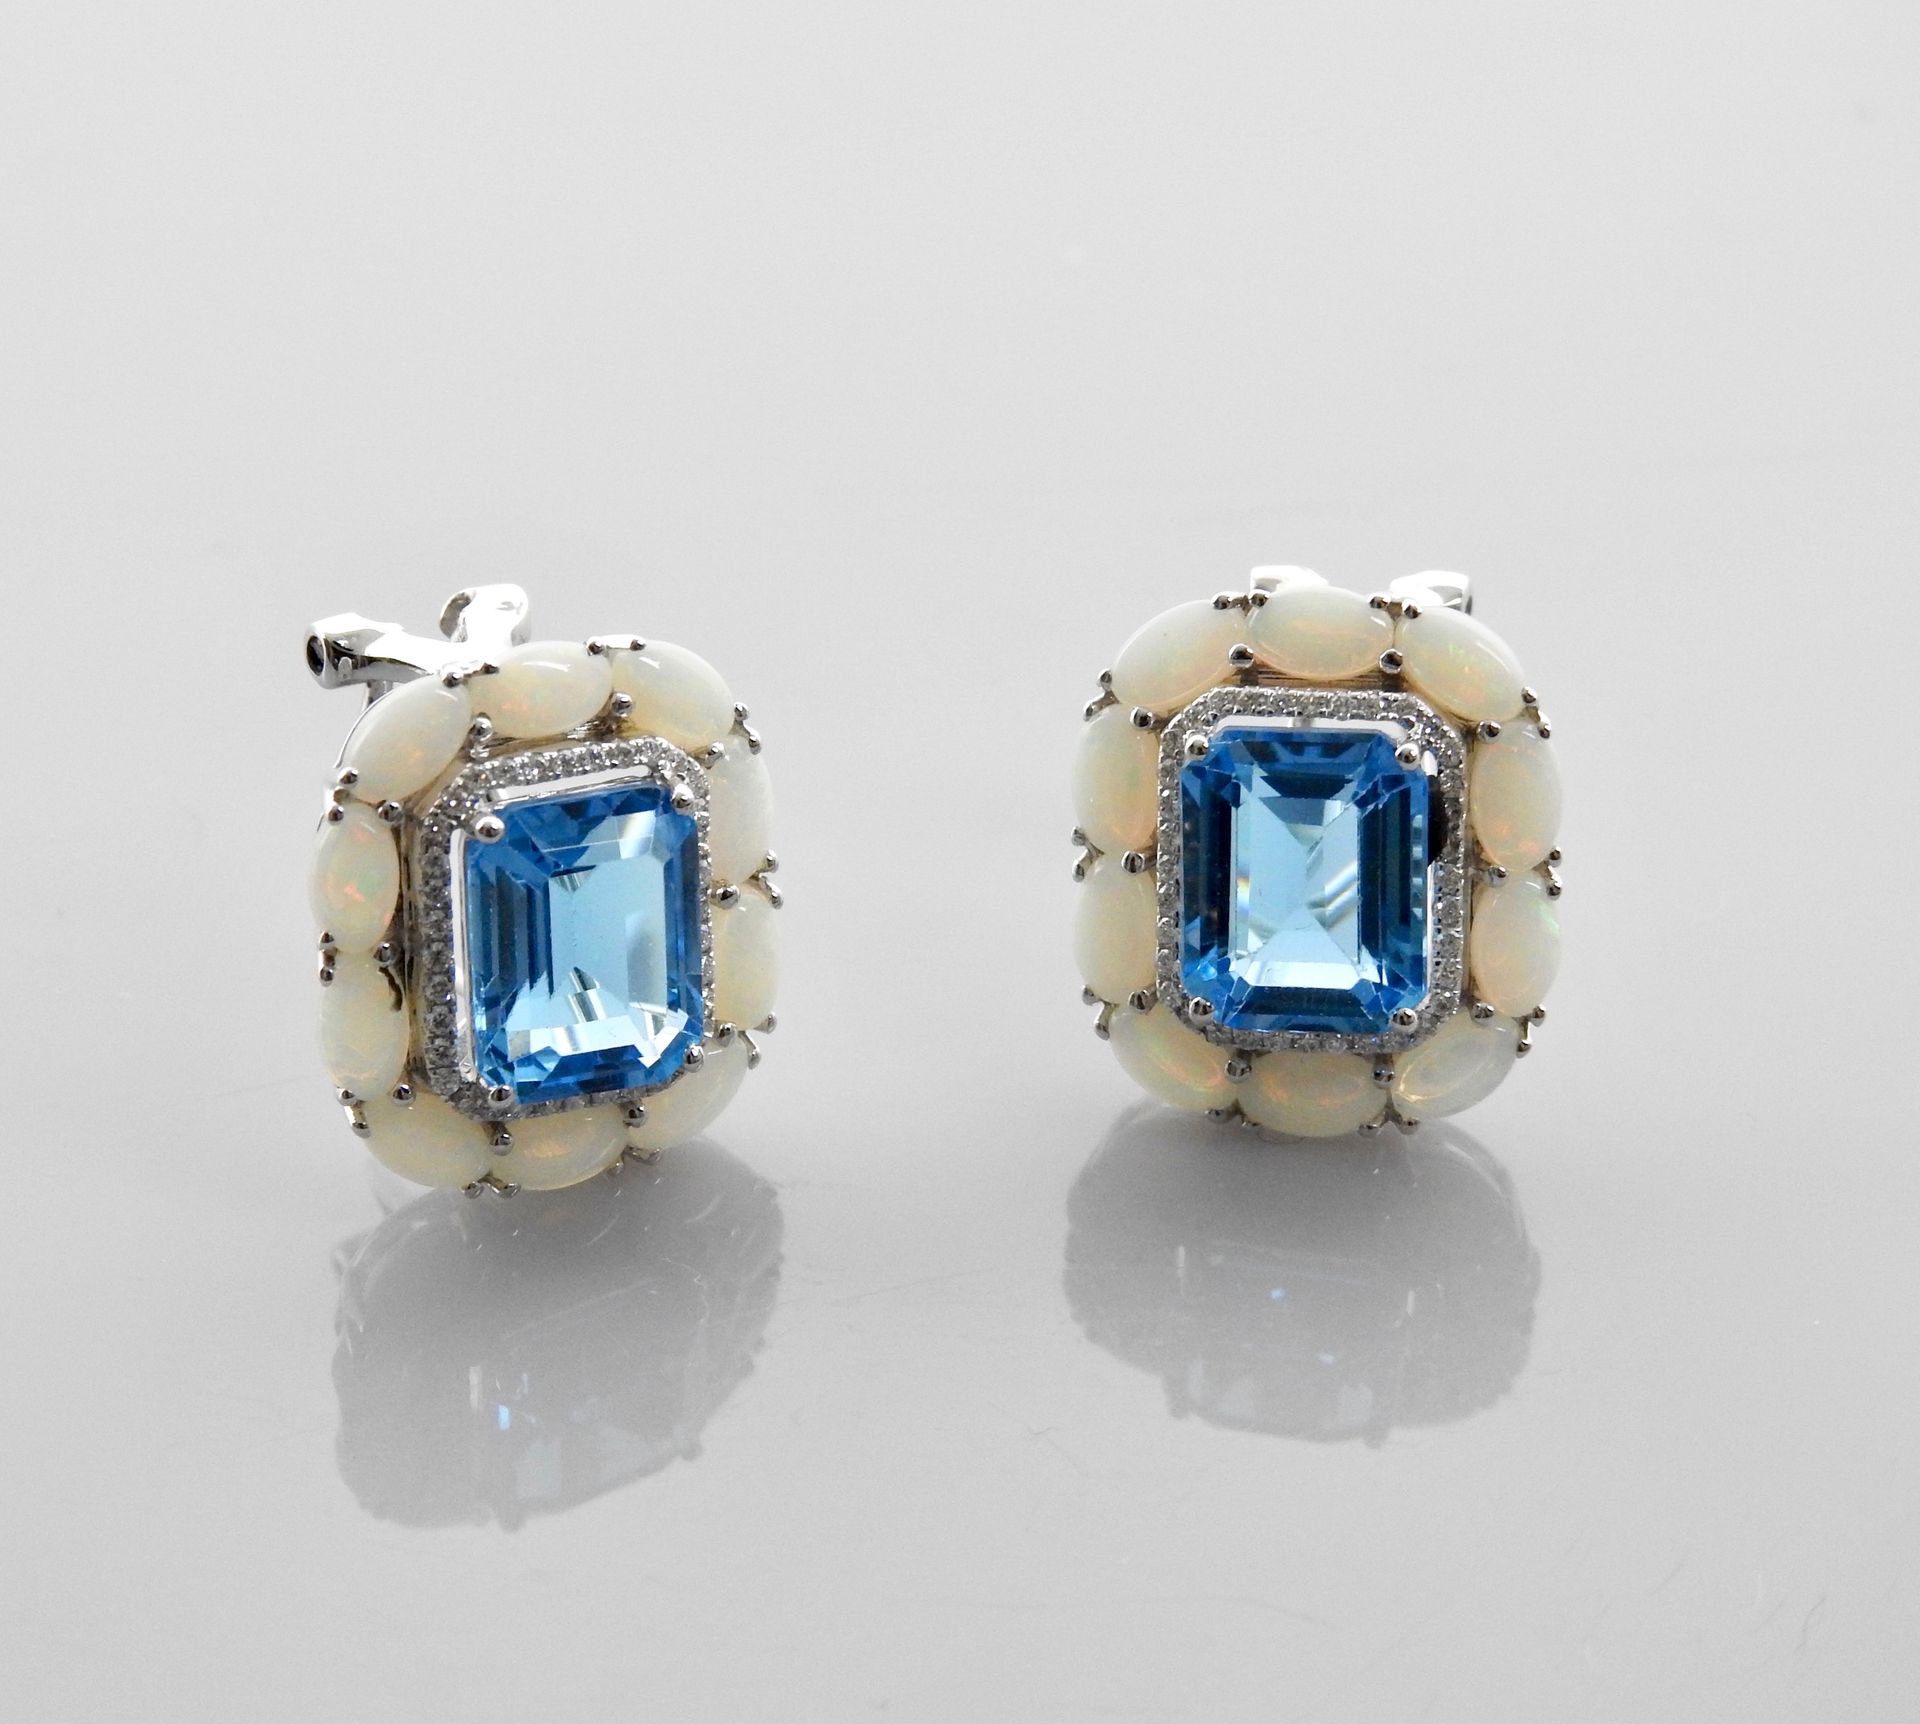 Null Earrings in white gold, 750 MM, each centered with a blue topaz in a row of&hellip;